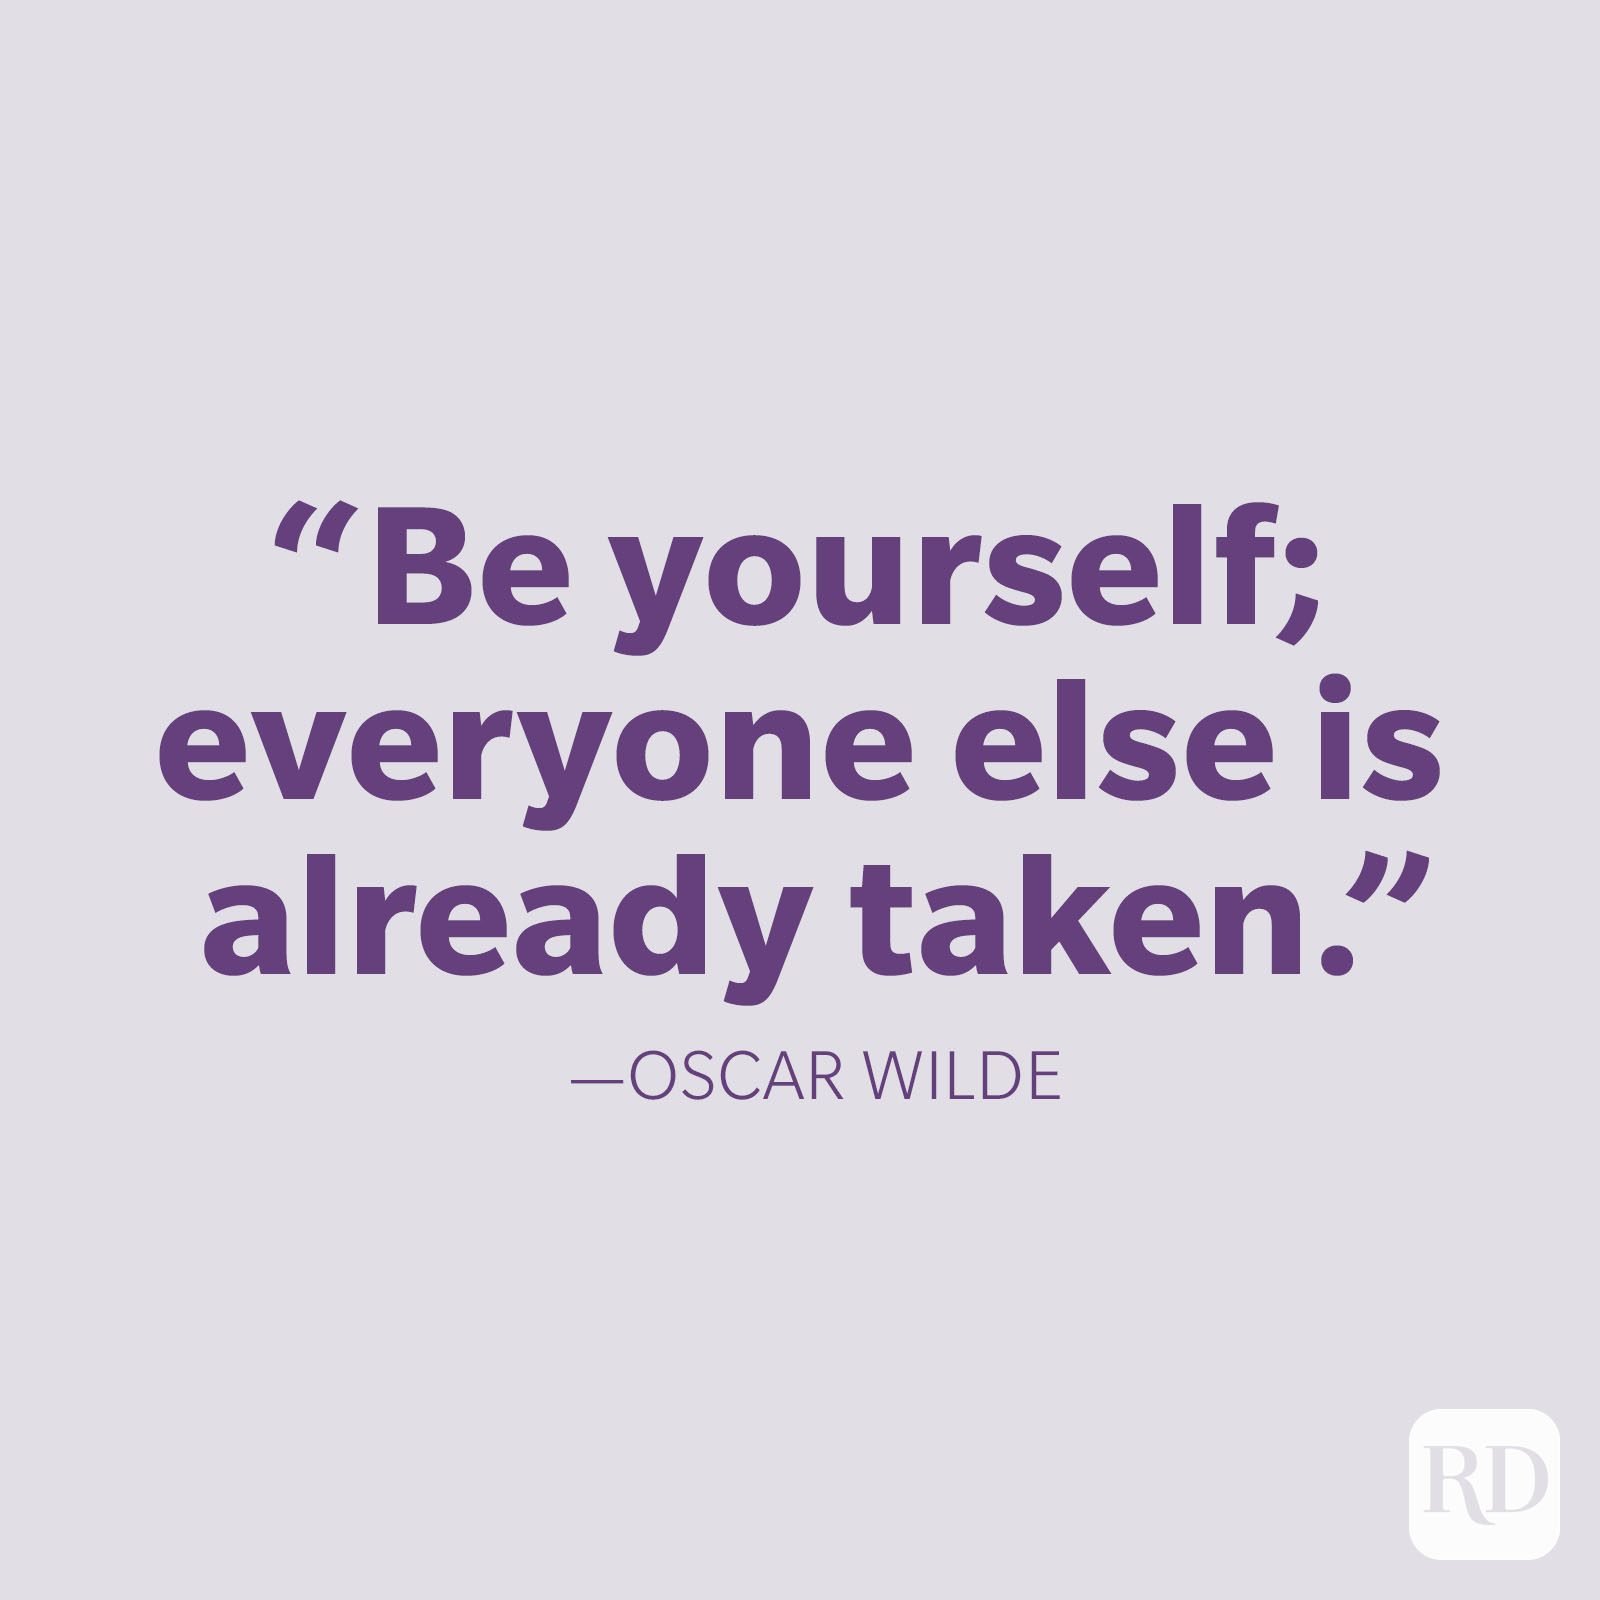 Famous Quotes About Being Yourself - Hertha Willabella